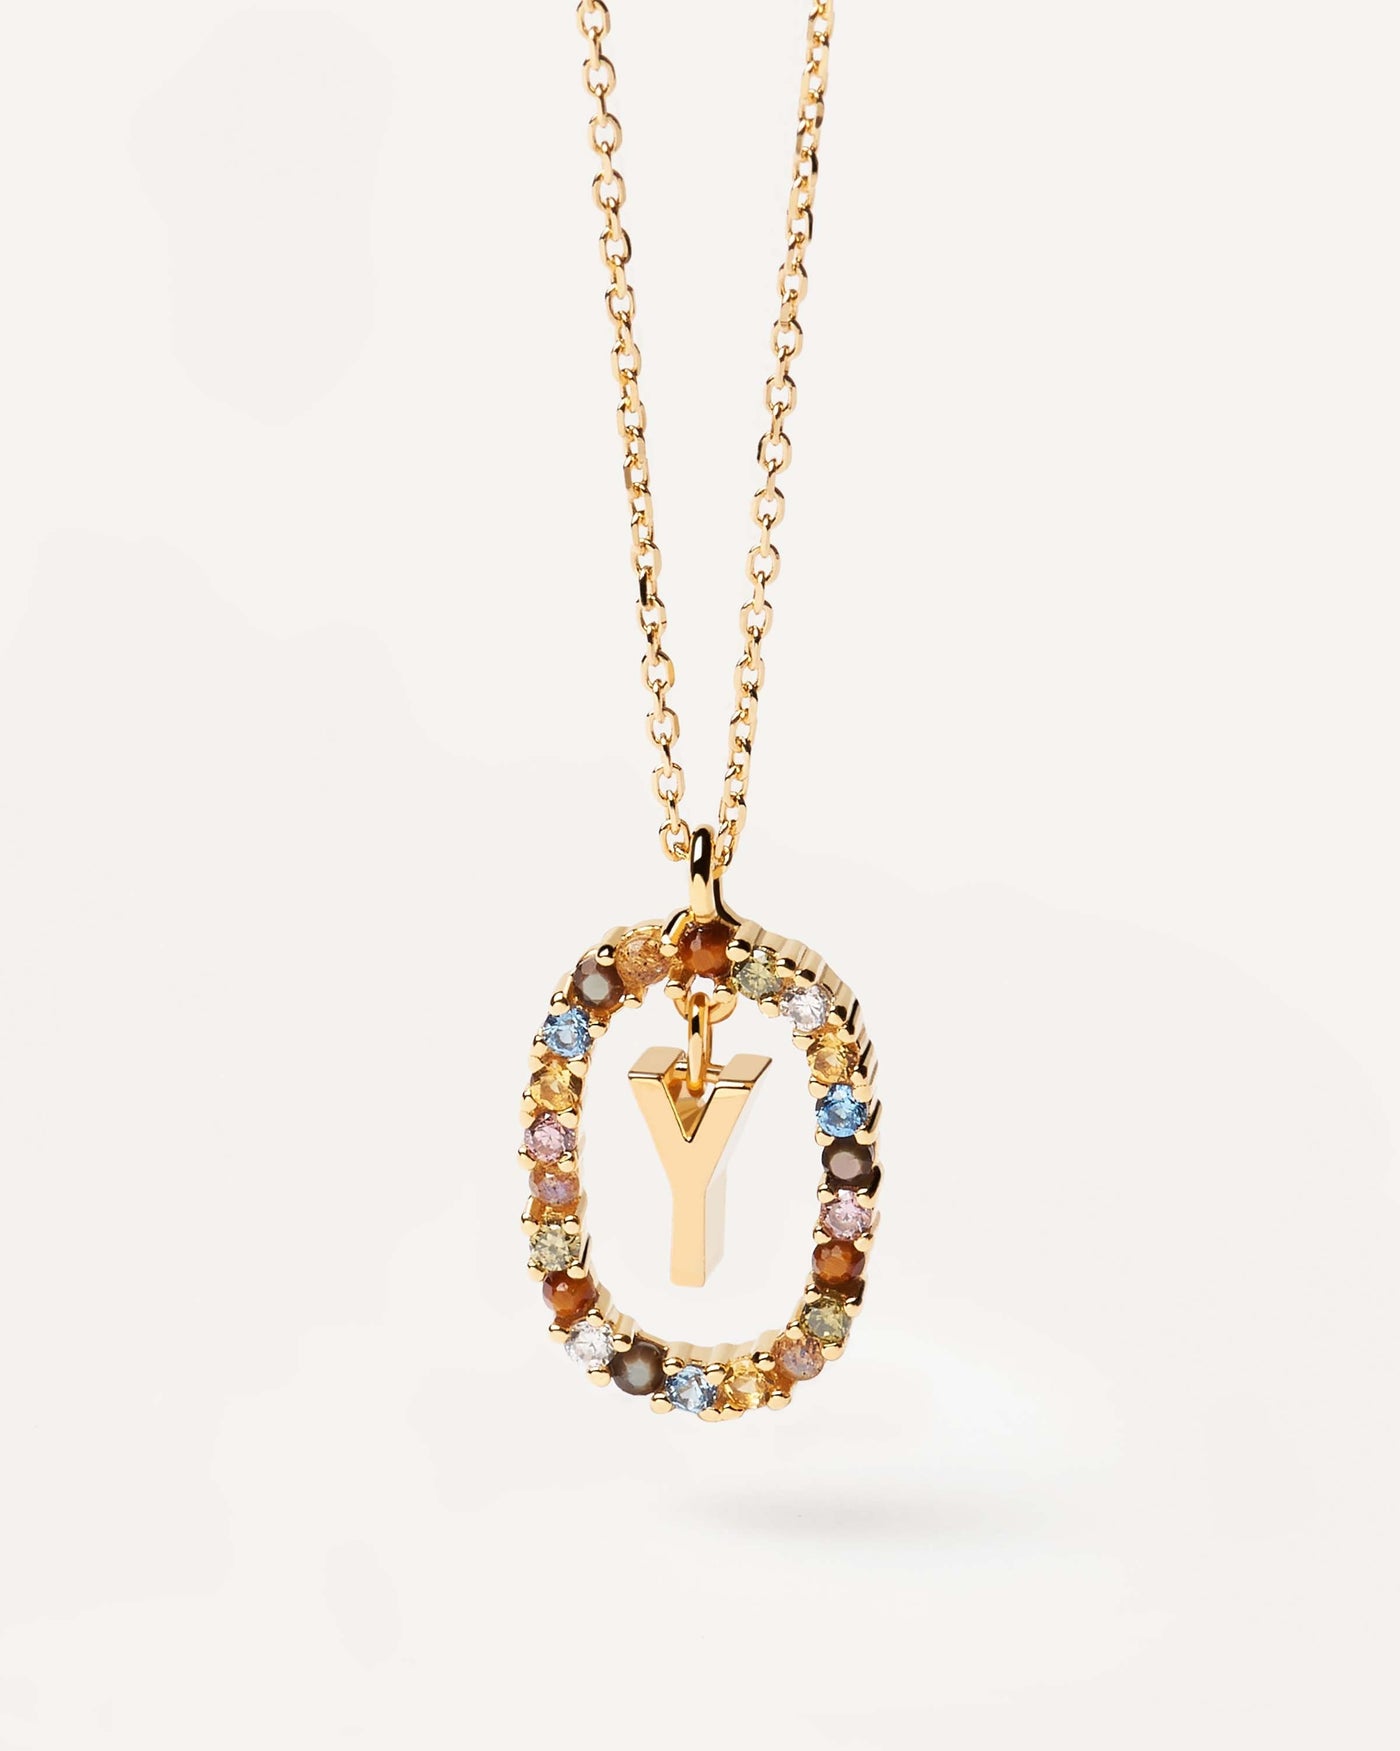 2023 Selection | Letter Y necklace. Initial Y necklace in gold-plated silver, circled by colorful gemstones. Get the latest arrival from PDPAOLA. Place your order safely and get this Best Seller. Free Shipping.